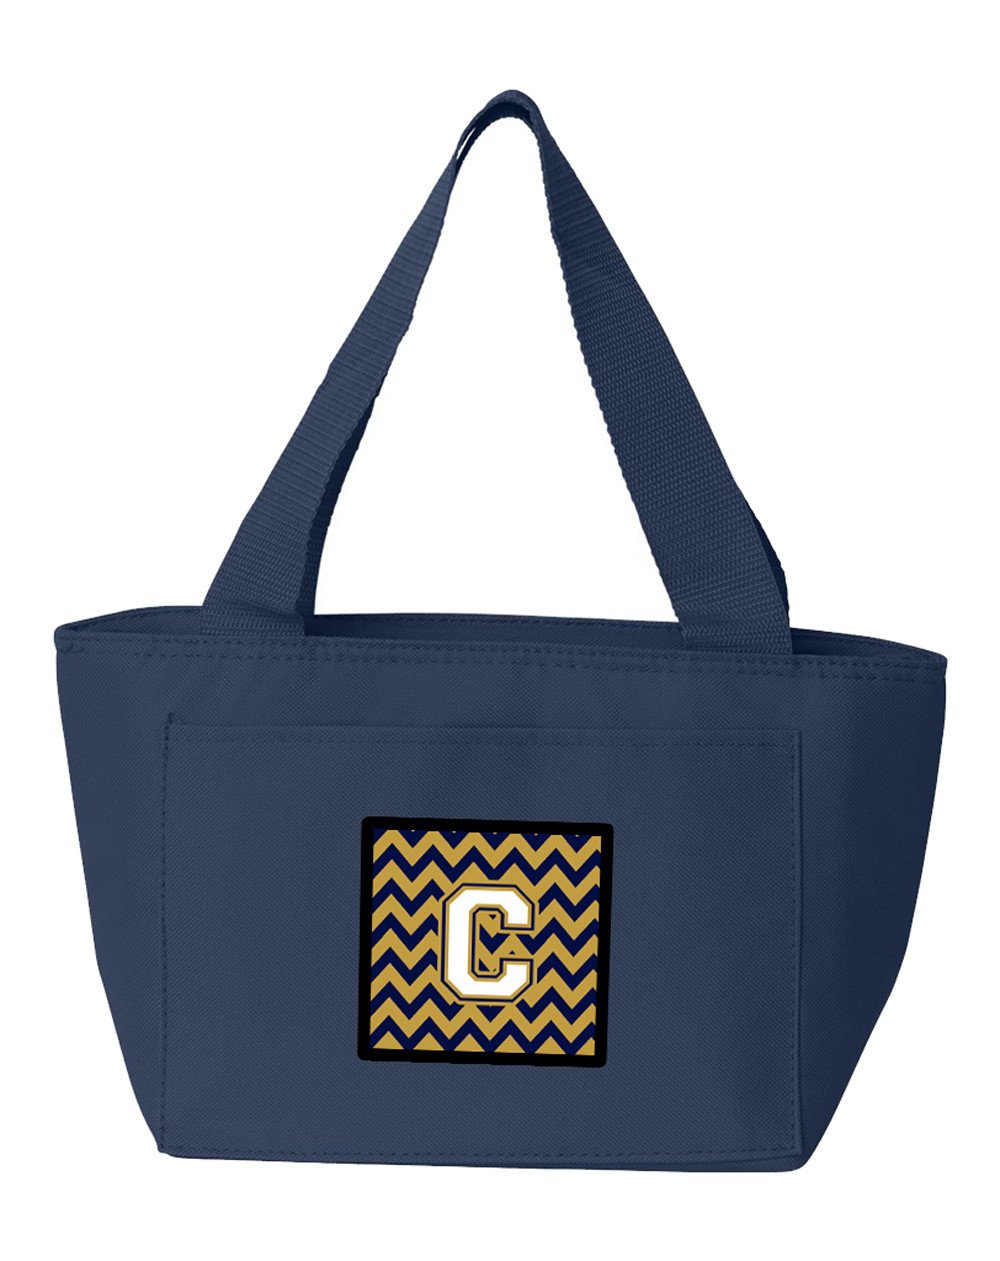 Letter C Chevron Navy Blue and Gold Lunch Bag CJ1057-CNA-8808 by Caroline's Treasures